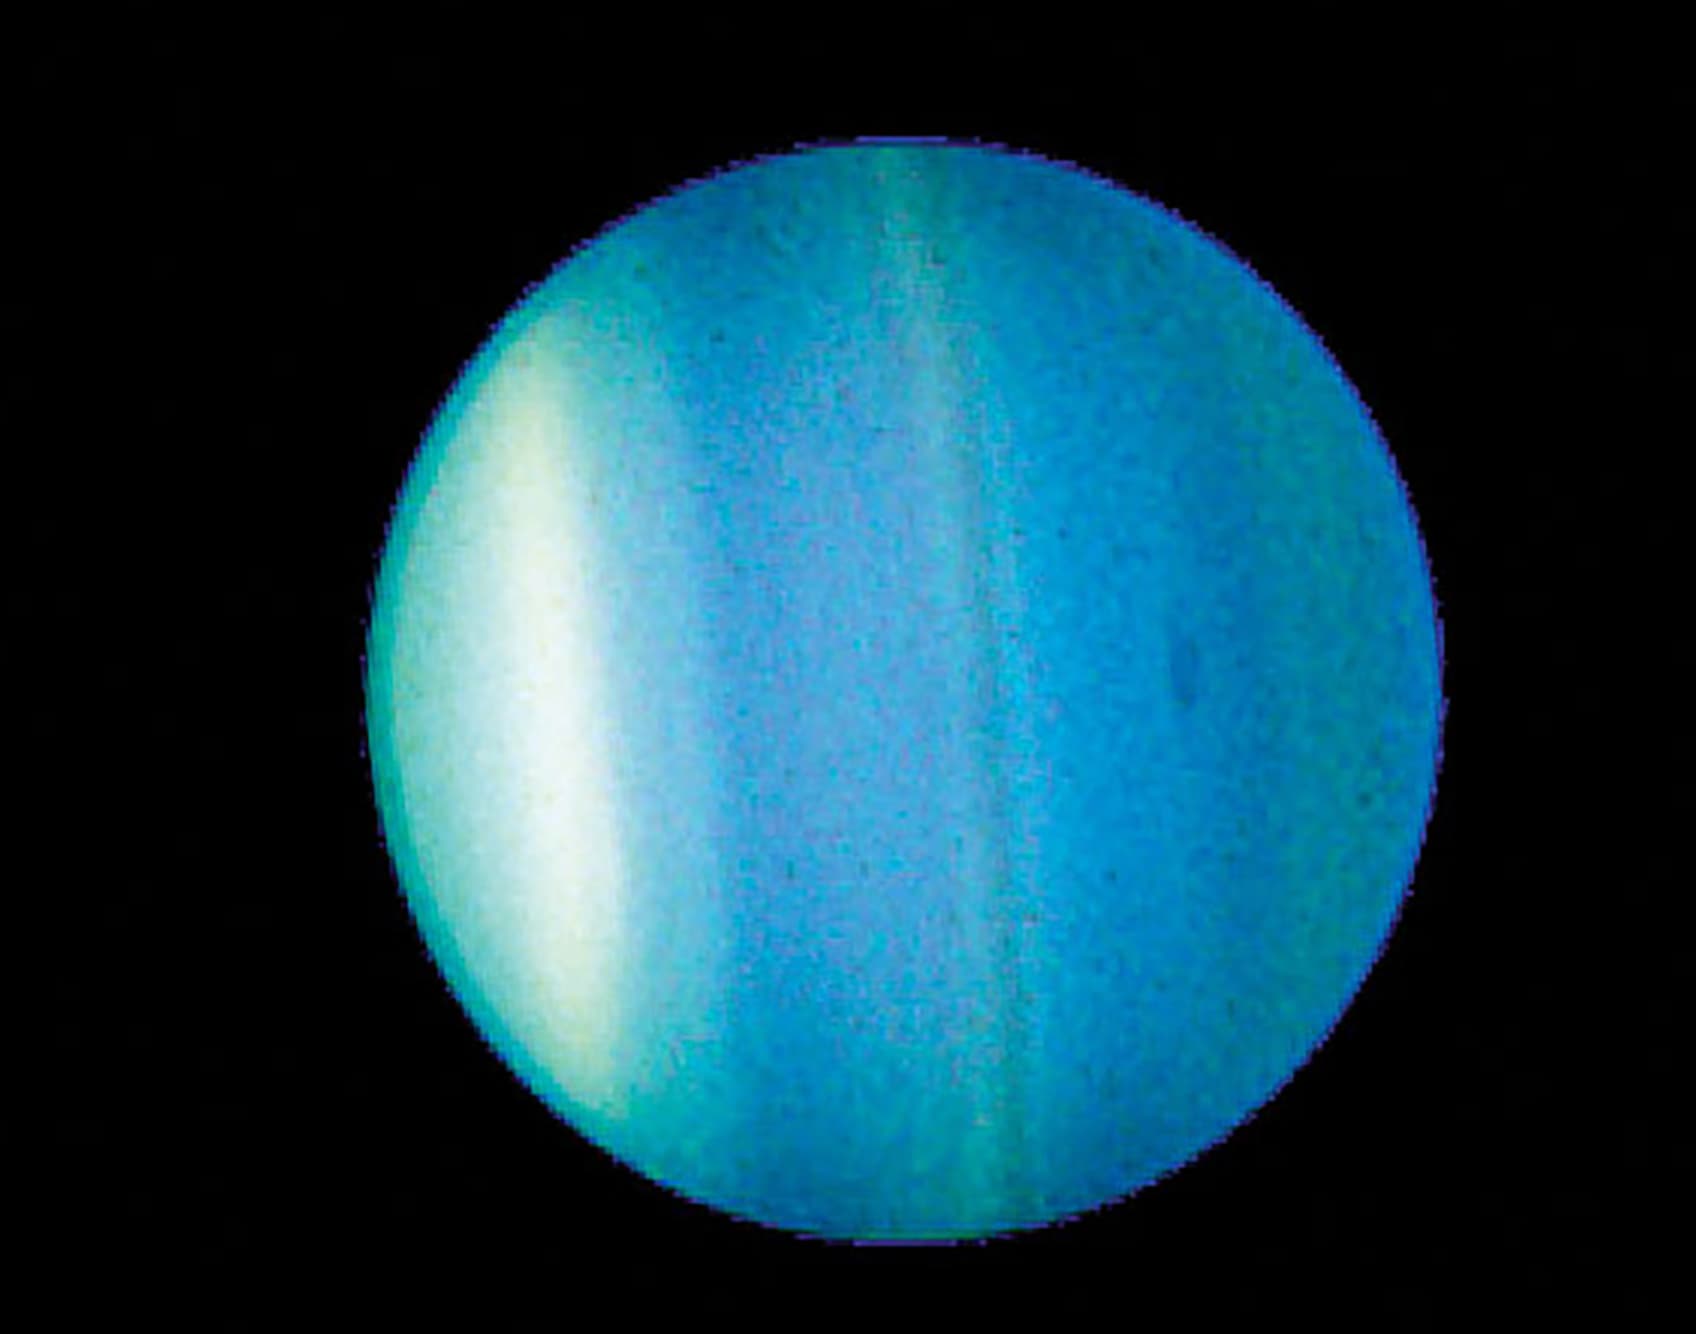 “The planet Uranus (1781) was discovered before the continent of Antarctica (1820).”